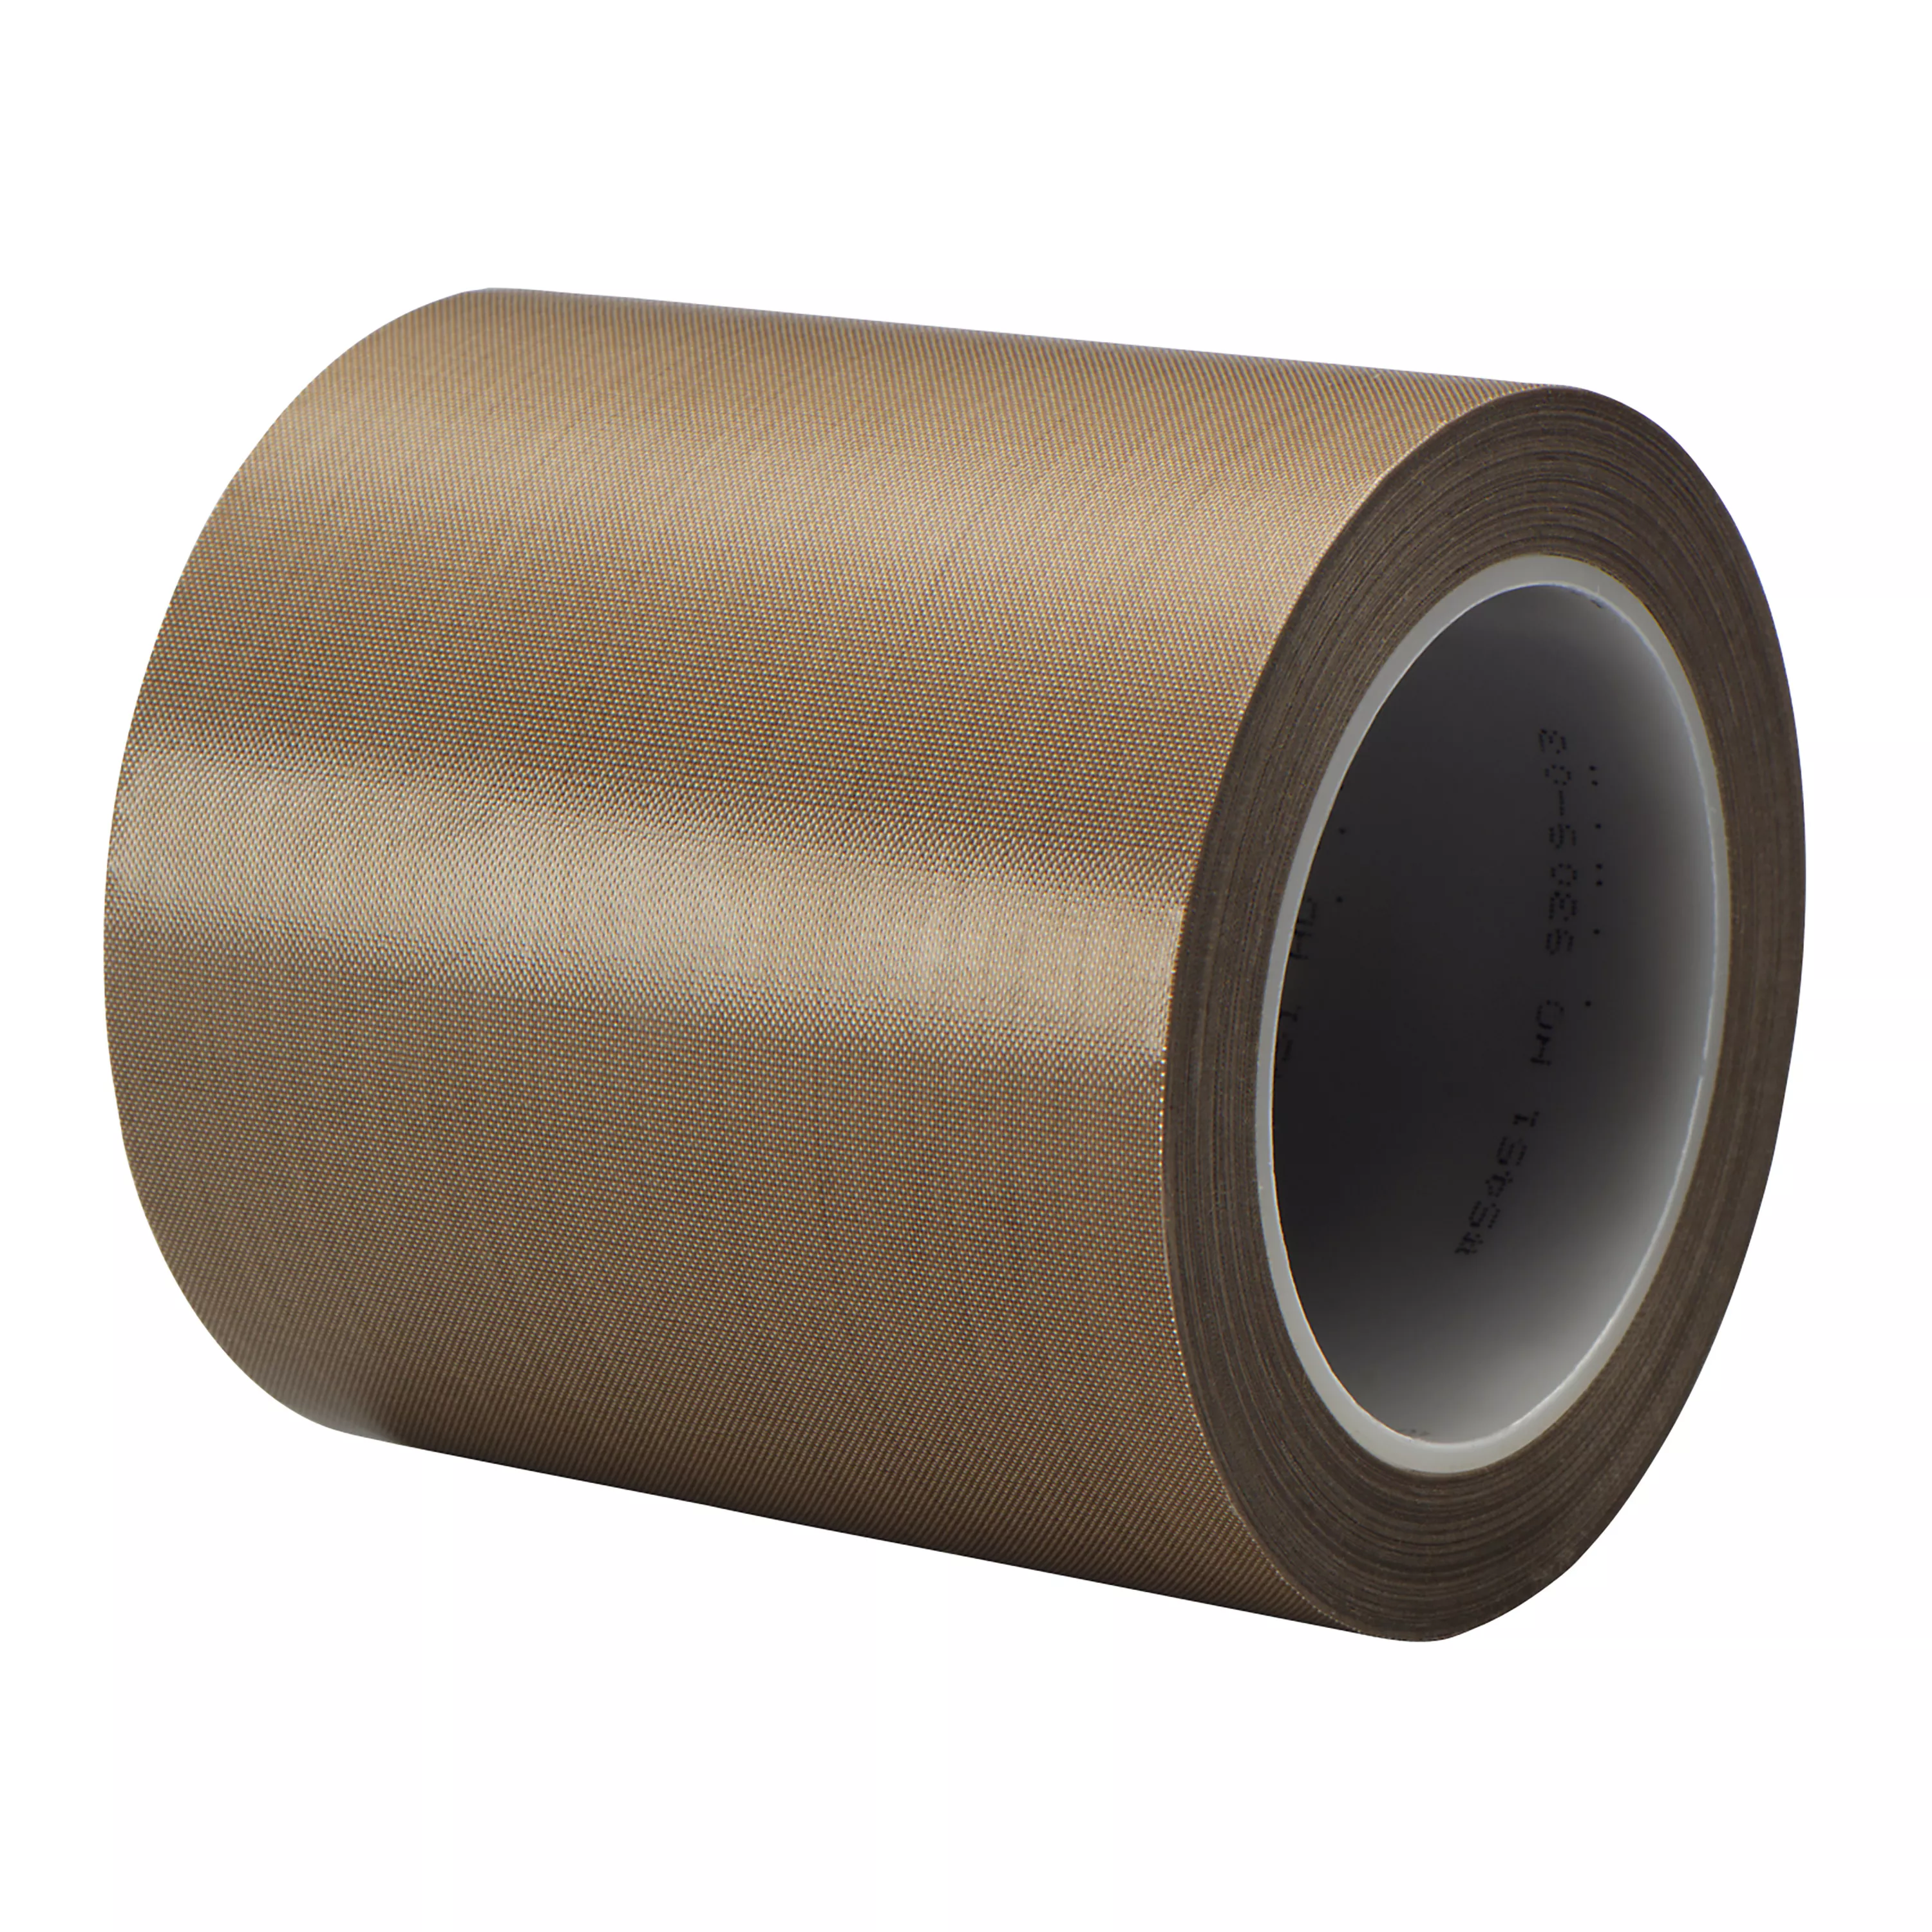 3M™ PTFE Glass Cloth Tape 5451, Brown, 6 in x 36 yd, 5.6 mil, 2
Roll/Case